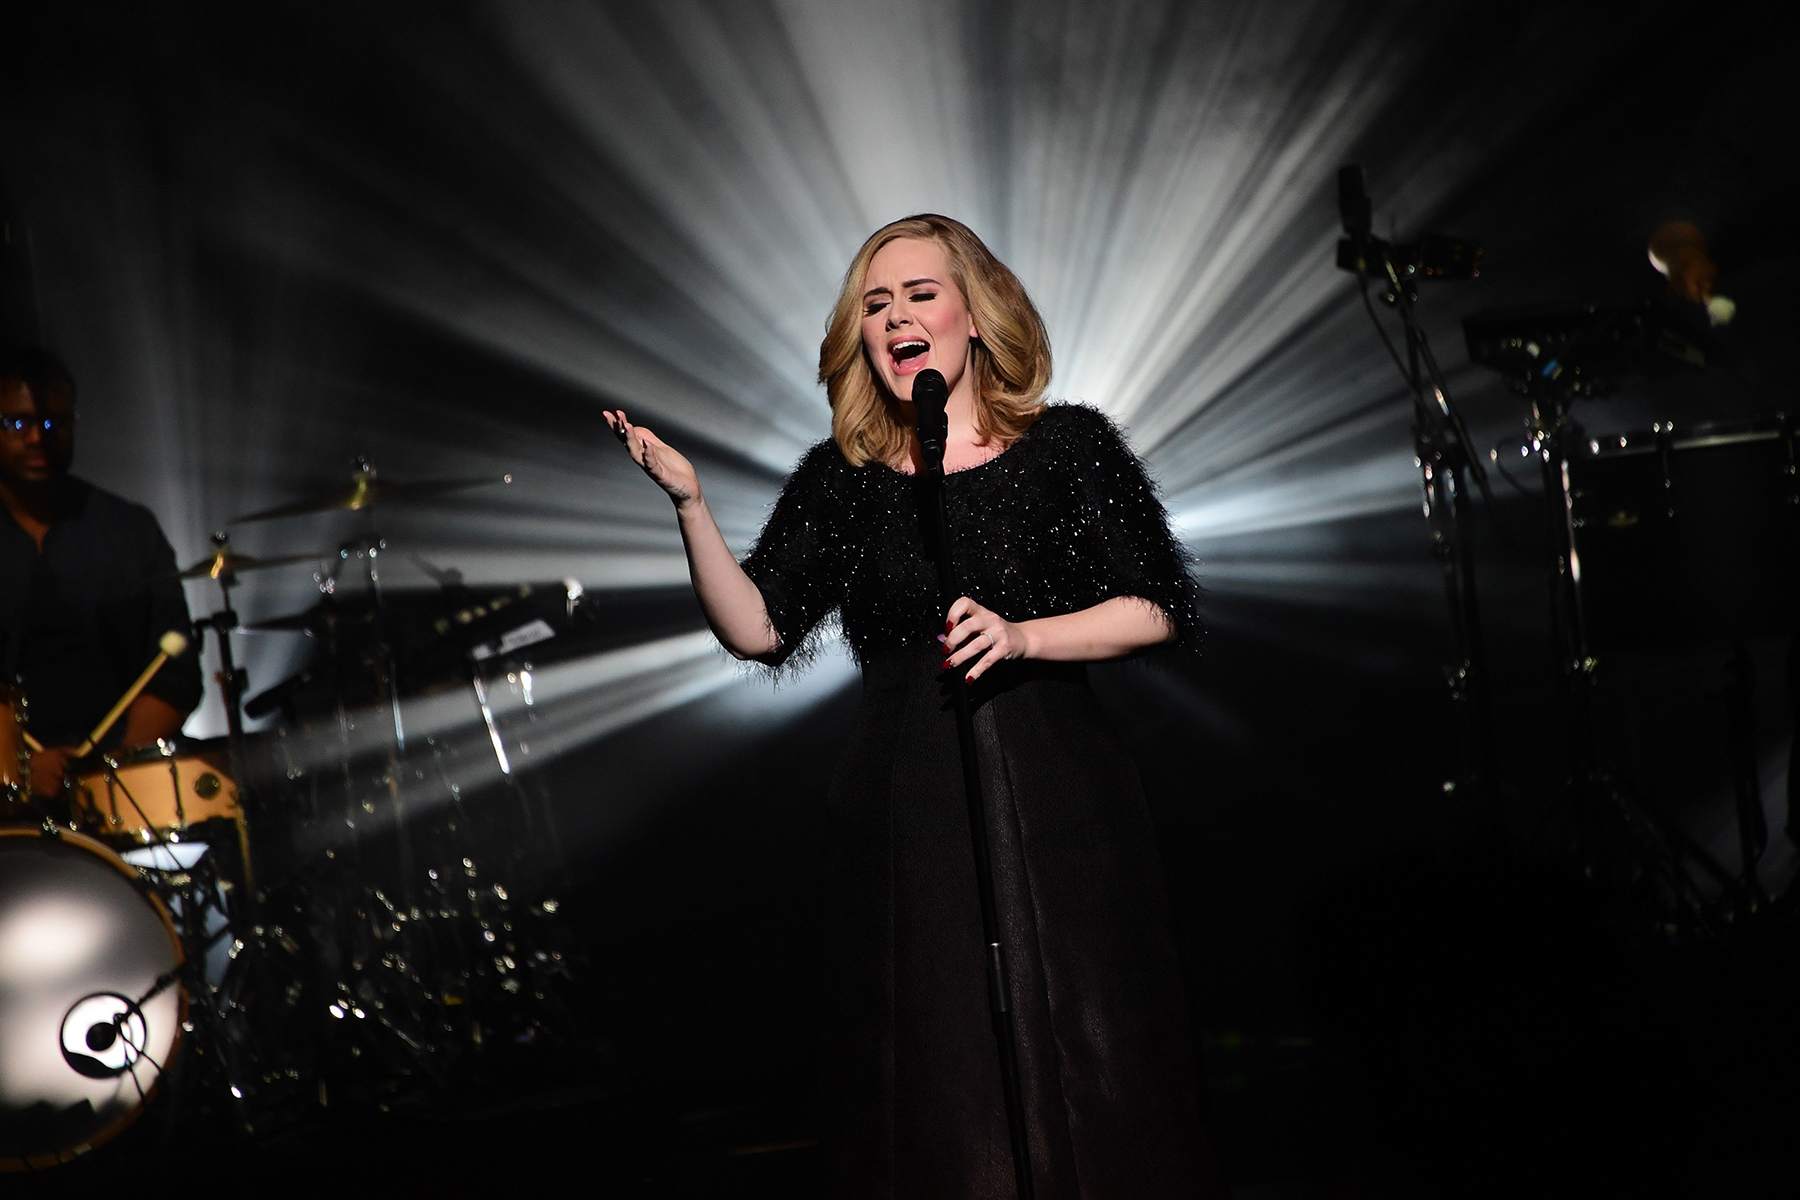 Could Adele’s song “Love in the Dark”, become a fan favorite?